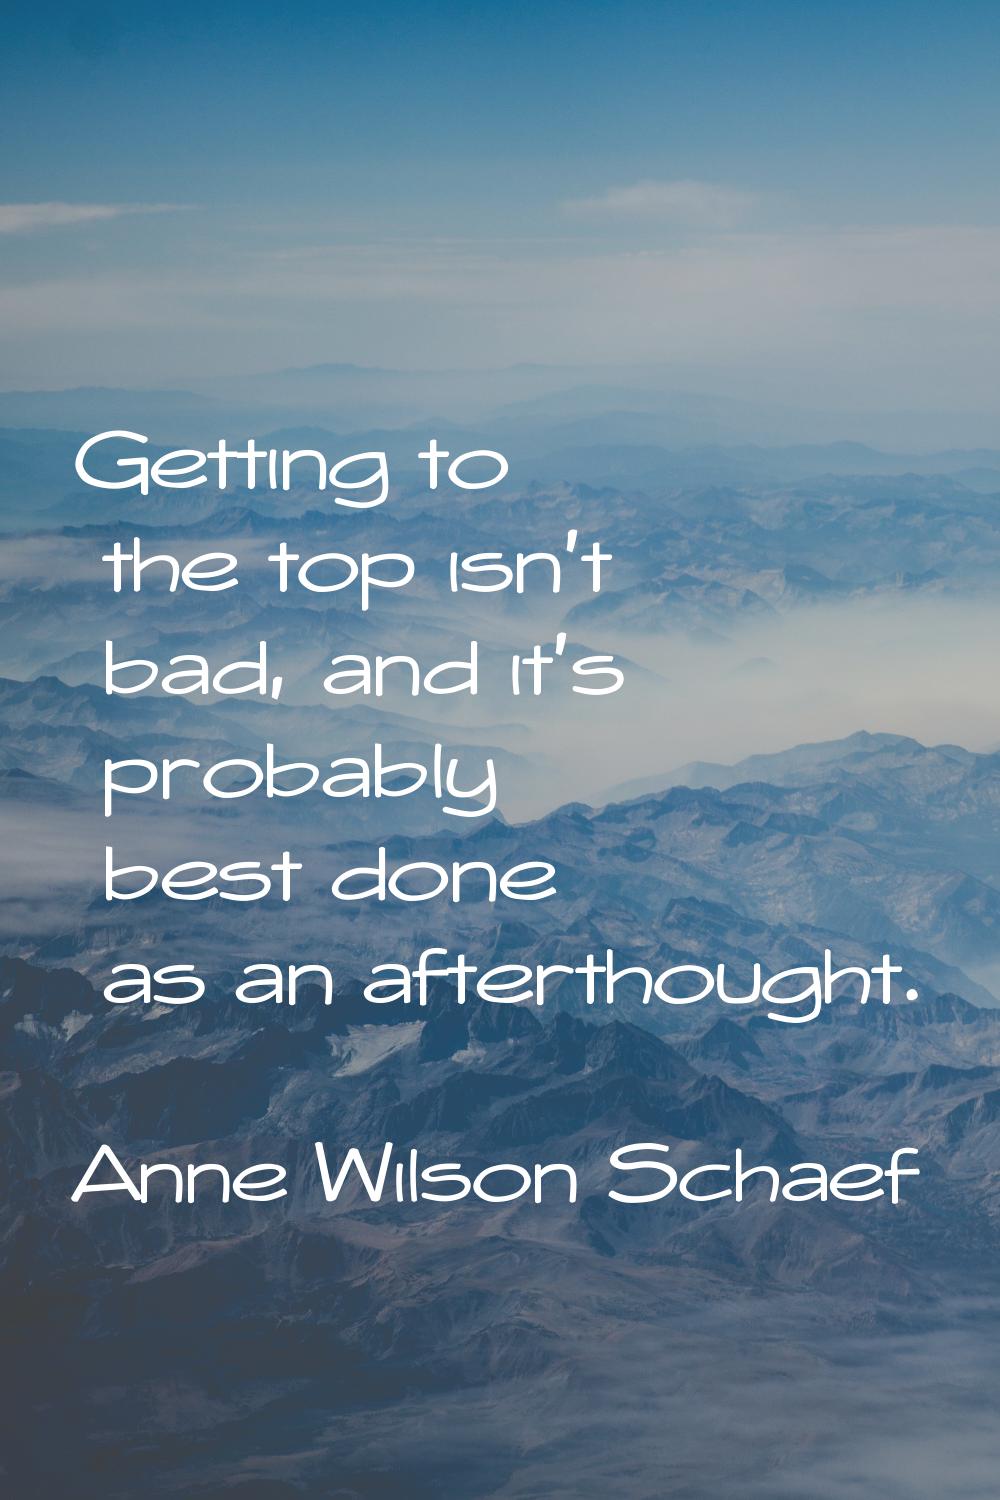 Getting to the top isn't bad, and it's probably best done as an afterthought.